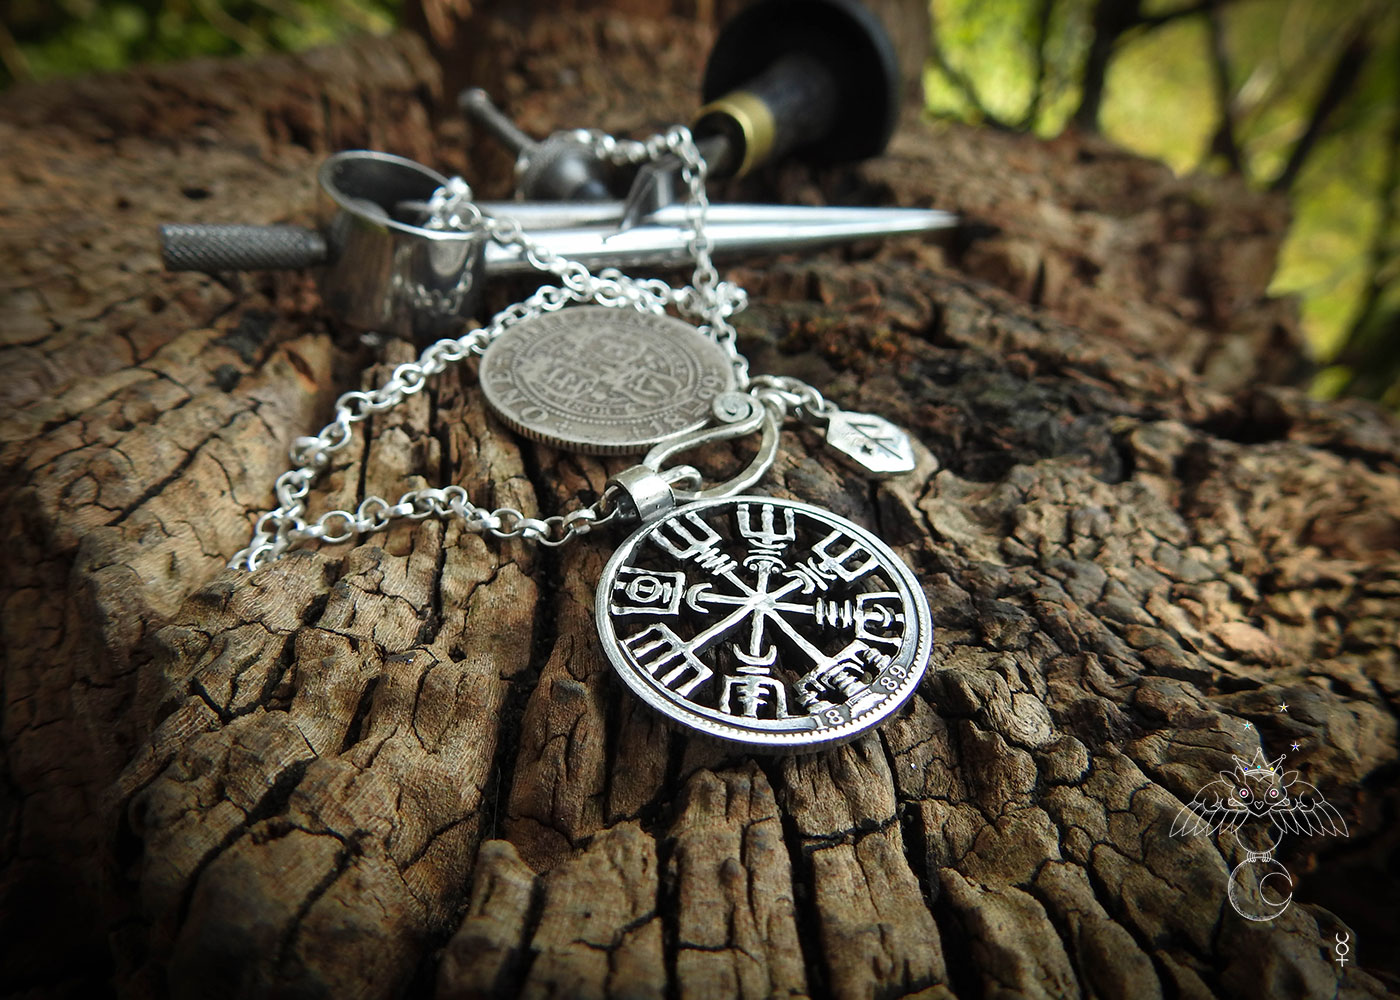 Vegvisir necklace - Recycled 100 year old silver shilling coin